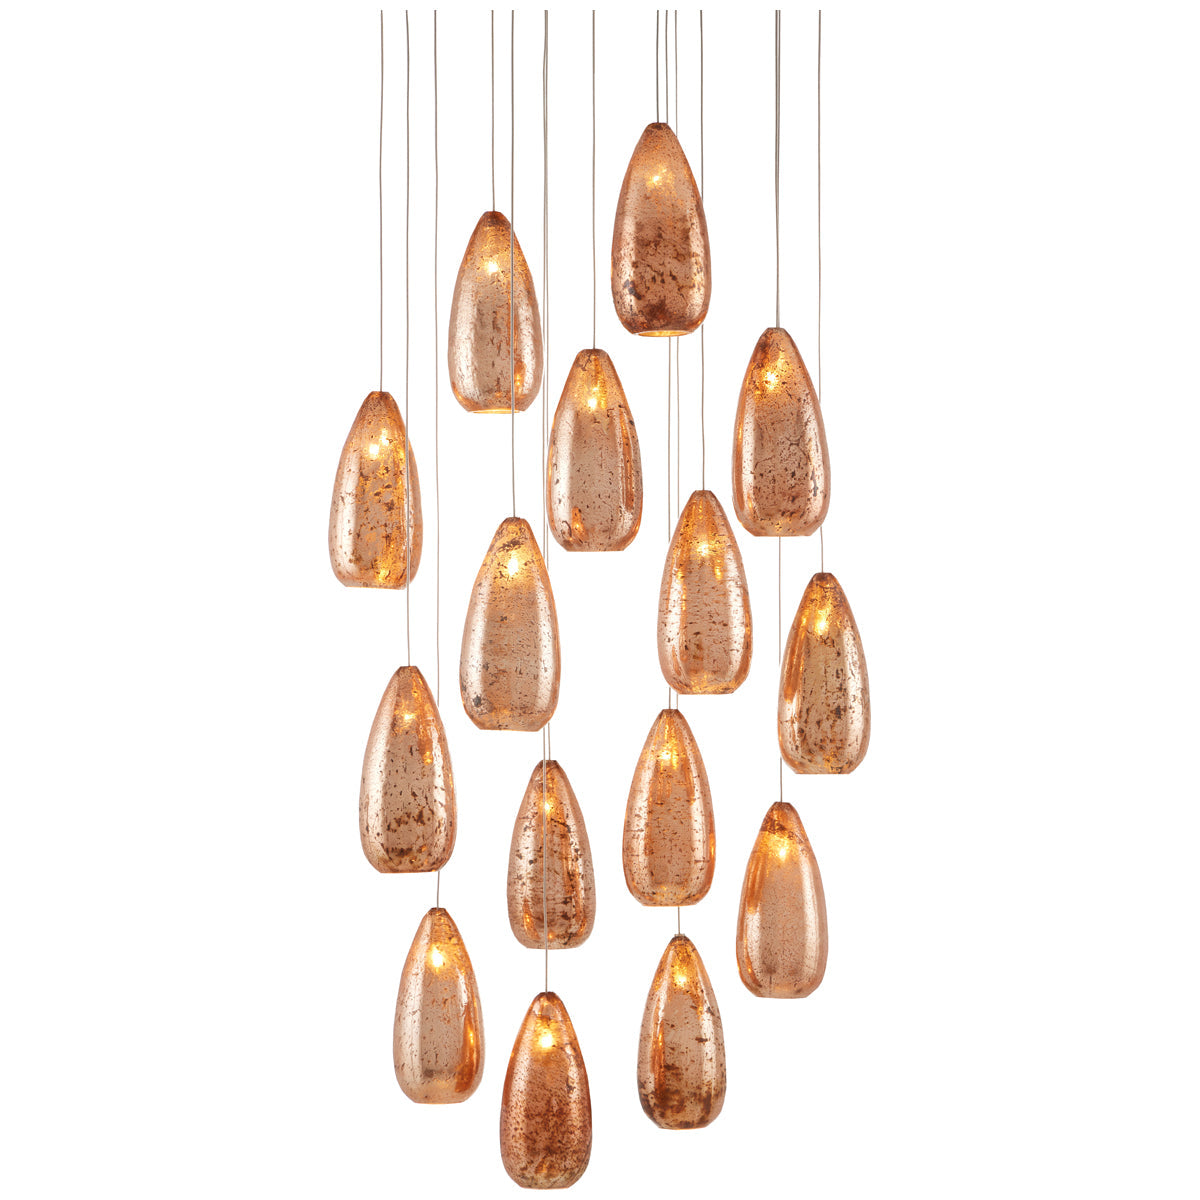 Currey and Company Rame Round 15-Light Multi-Drop Pendant